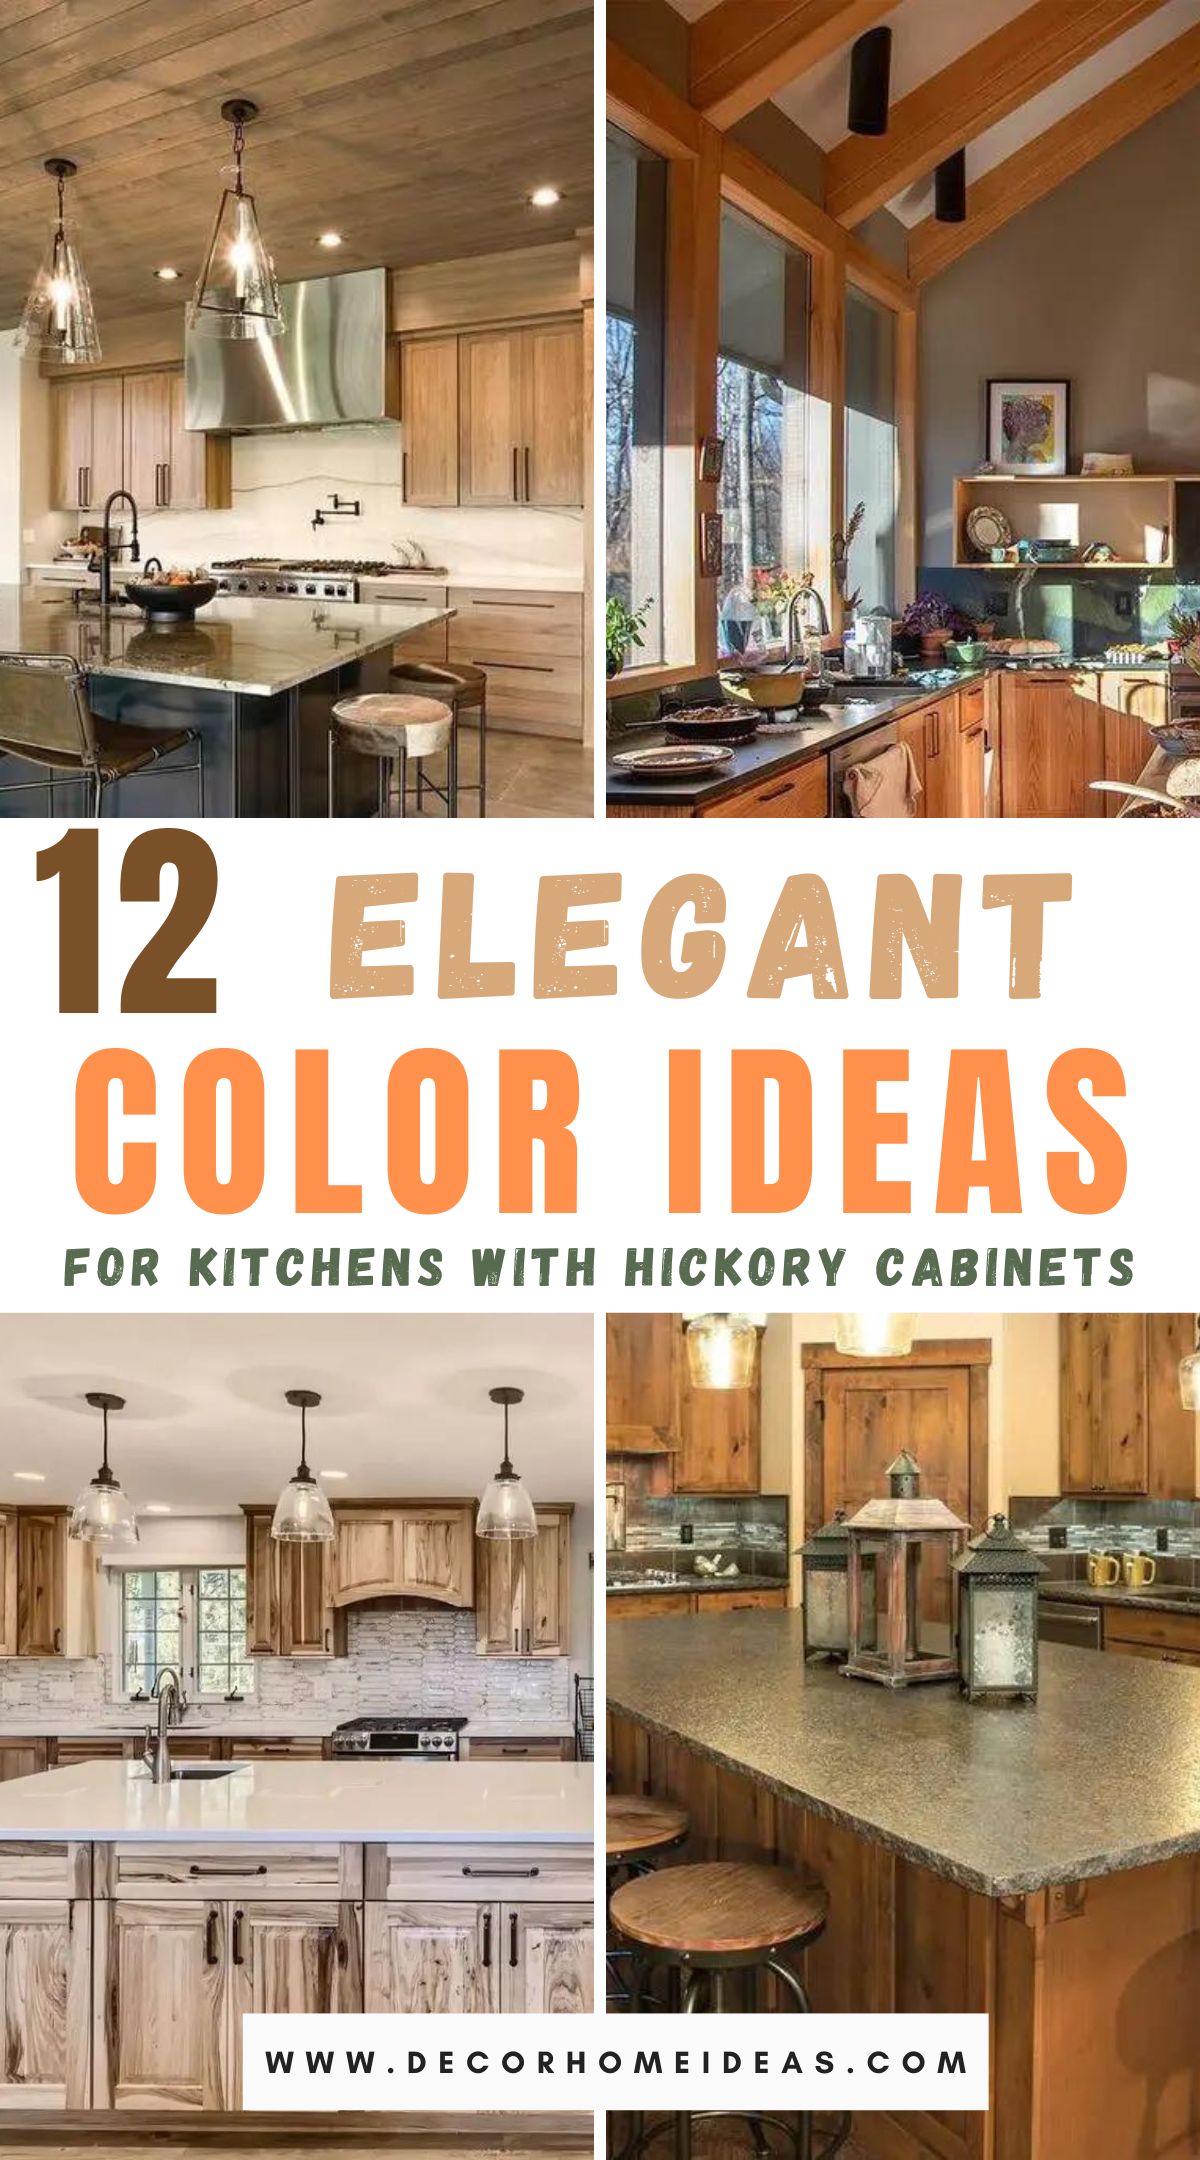 Elevate your kitchen's style with these 12 elegant color ideas that complement hickory cabinets. Discover beautiful palettes that enhance the natural warmth and character of your kitchen space.